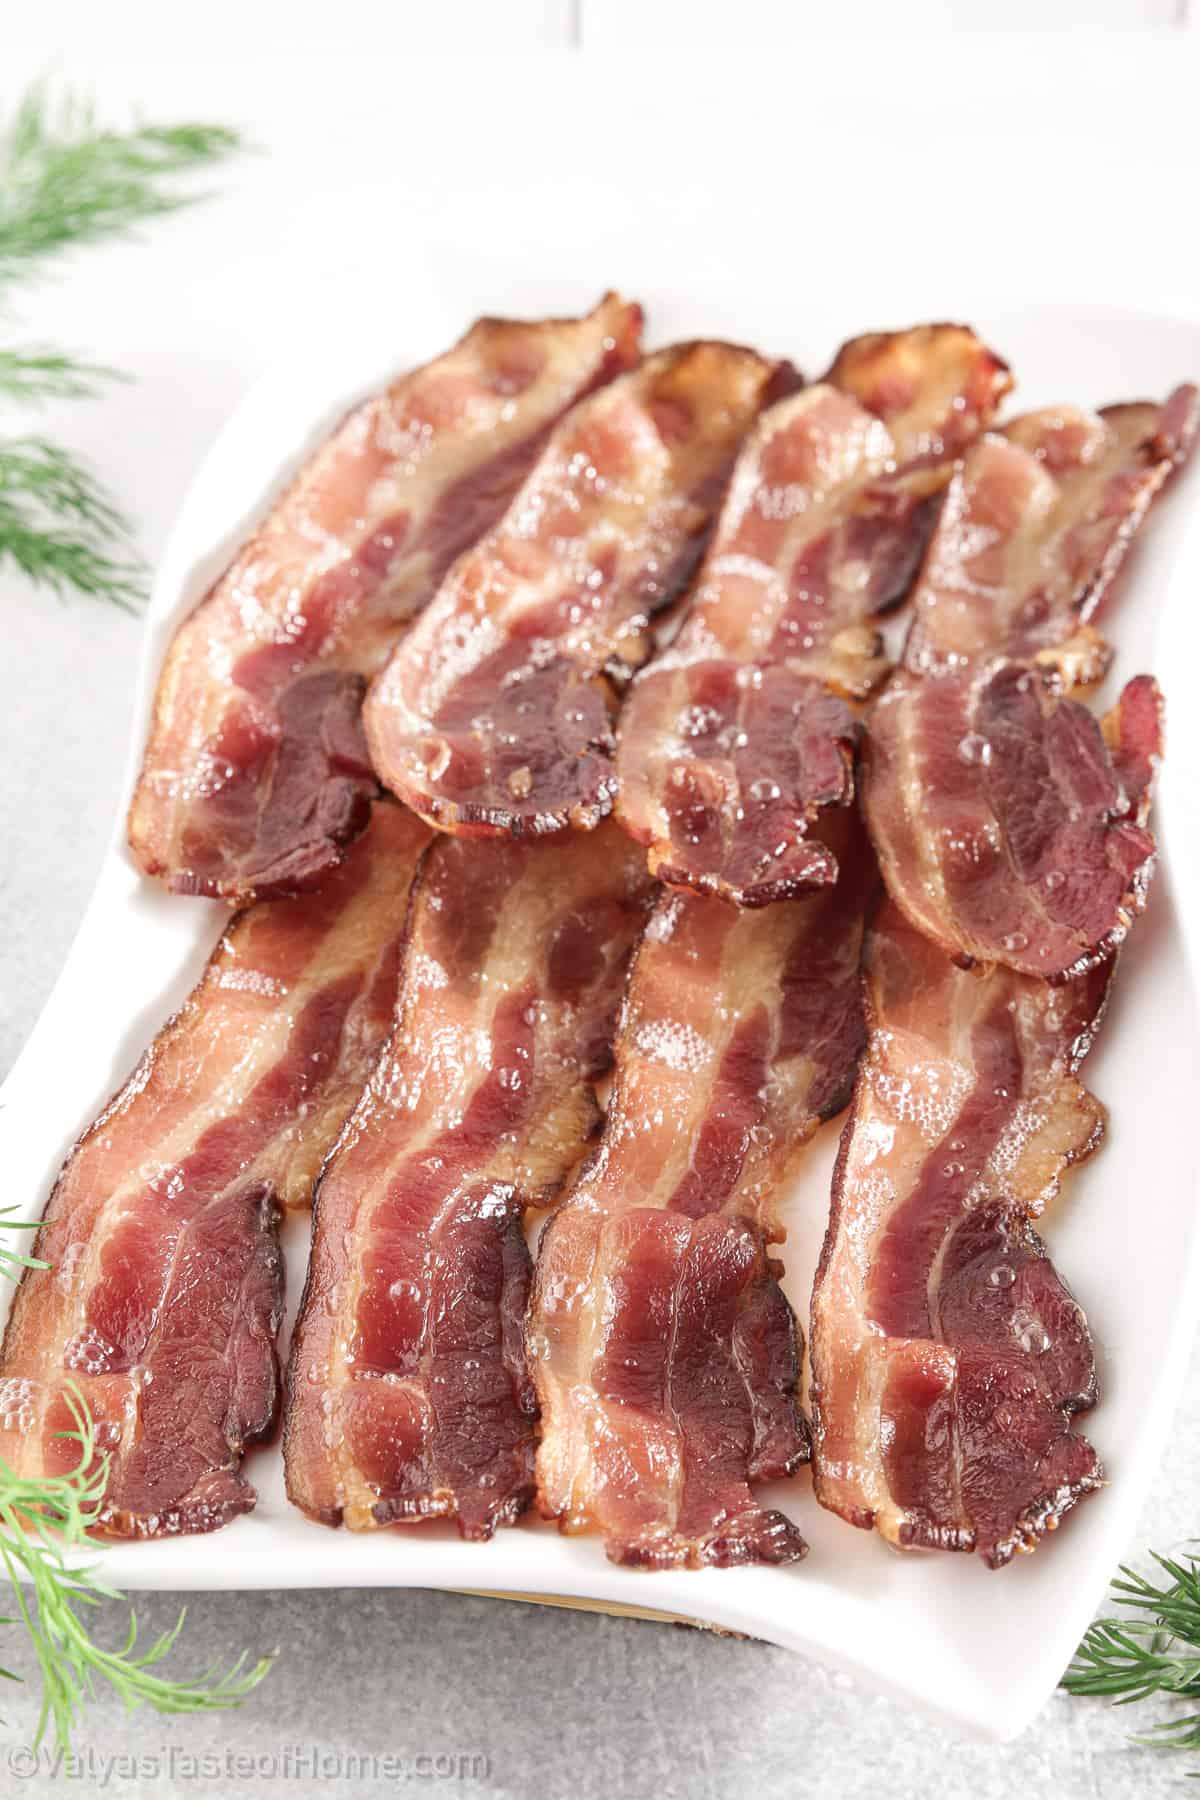 Quickly and simply prepare your bacon in the oven by broiling, instead of messy frying on the stovetop.